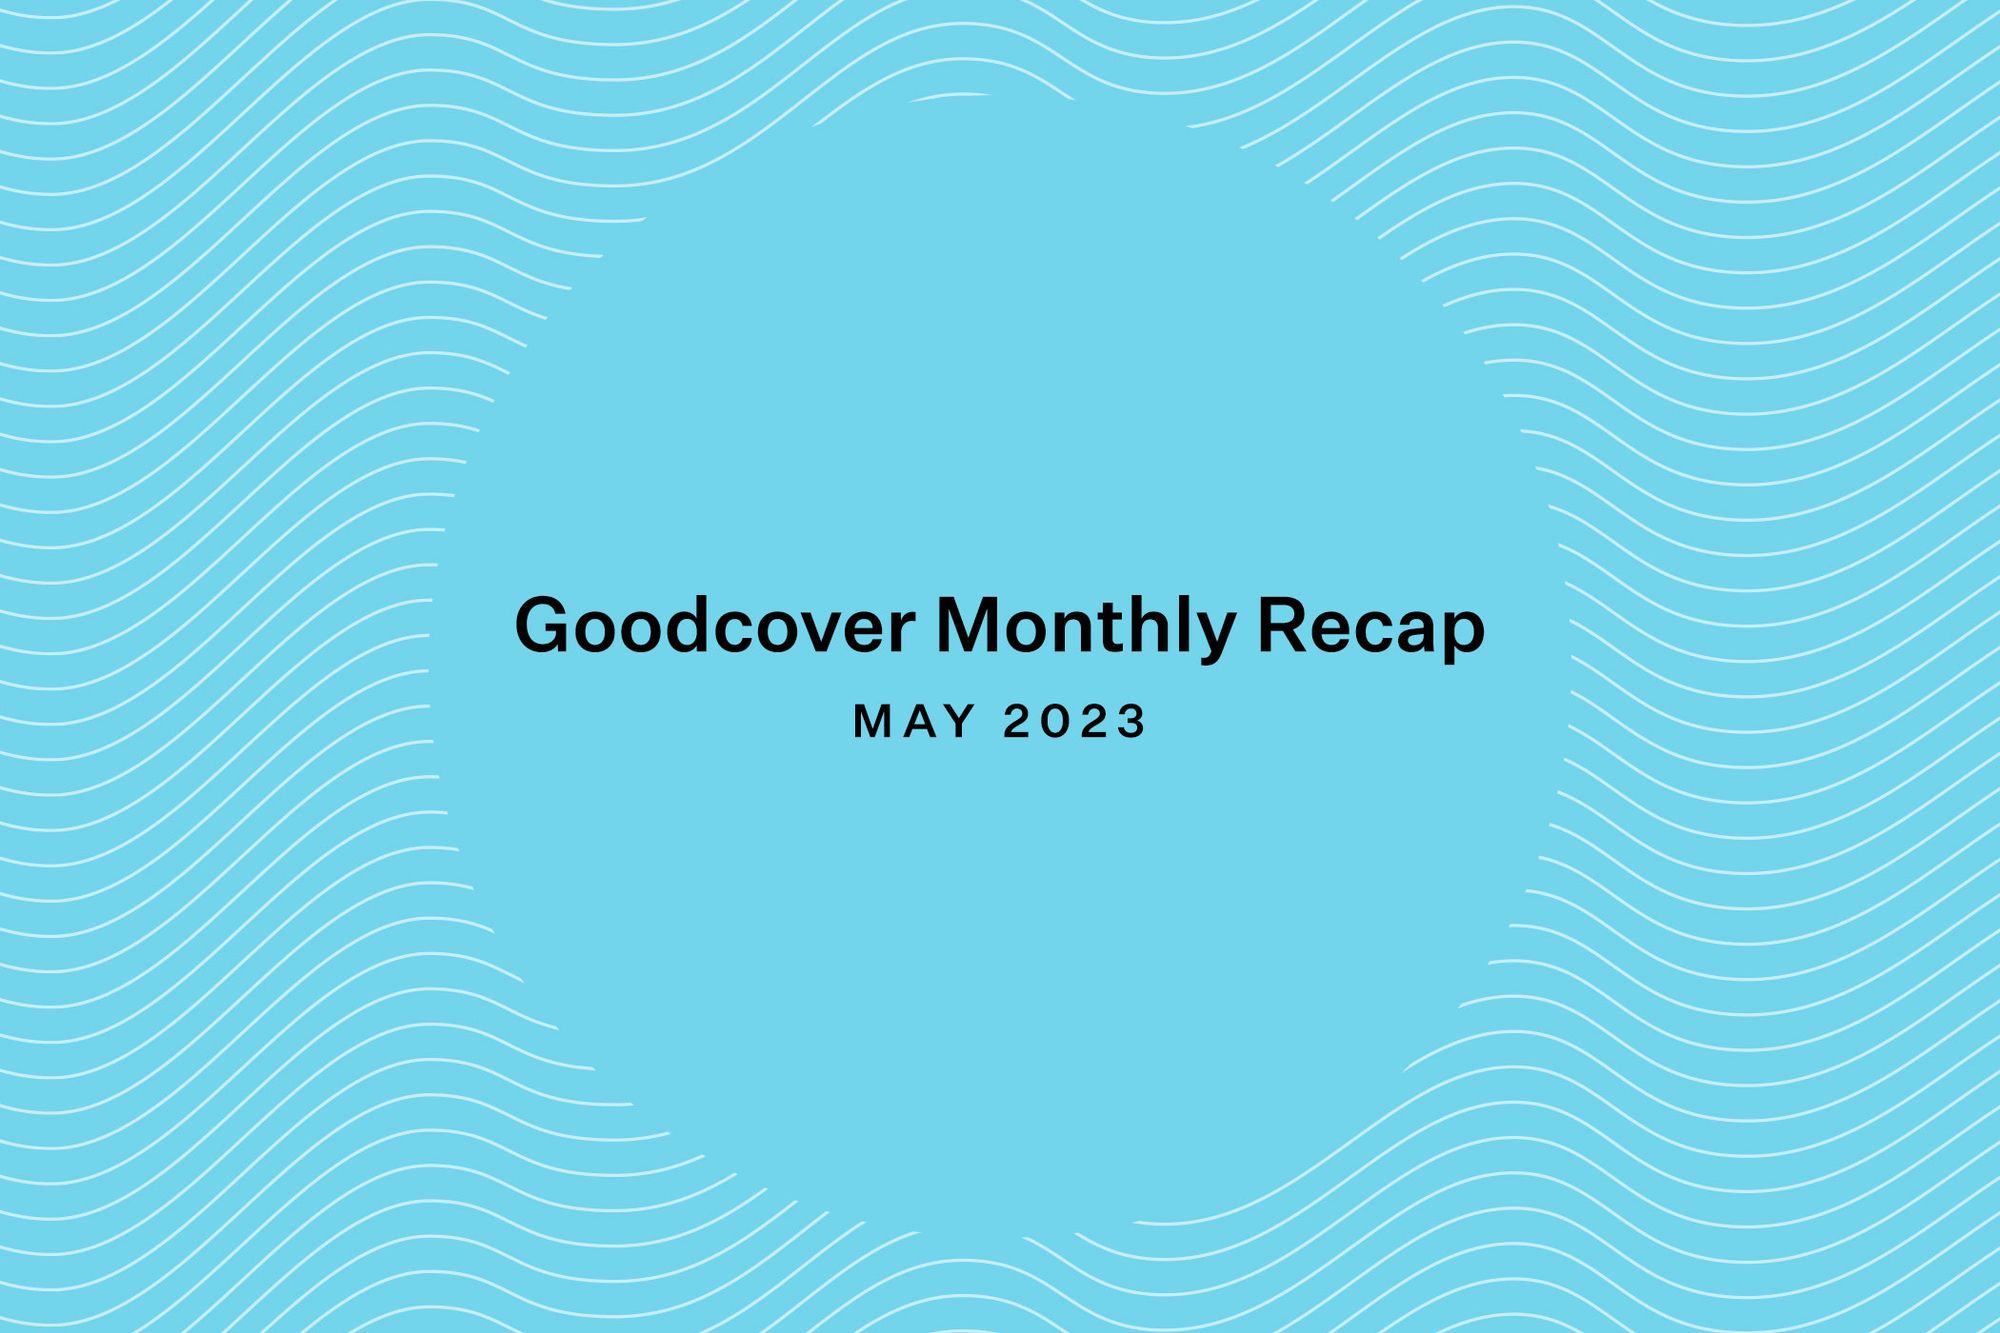 Goodcover Monthly News Roundup | May 2023